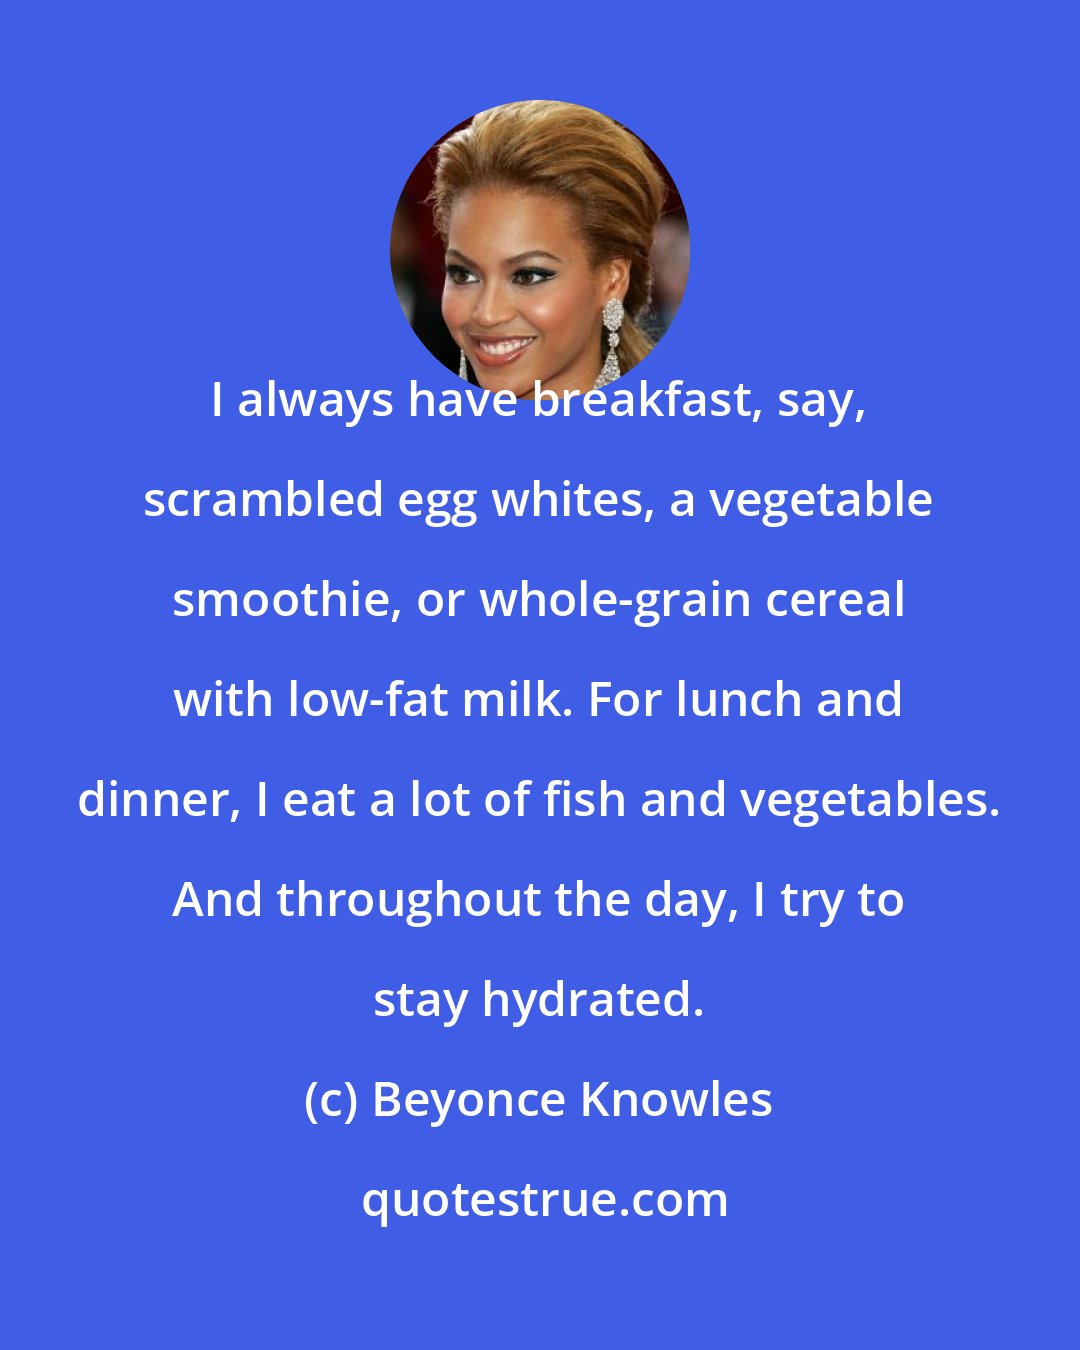 Beyonce Knowles: I always have breakfast, say, scrambled egg whites, a vegetable smoothie, or whole-grain cereal with low-fat milk. For lunch and dinner, I eat a lot of fish and vegetables. And throughout the day, I try to stay hydrated.